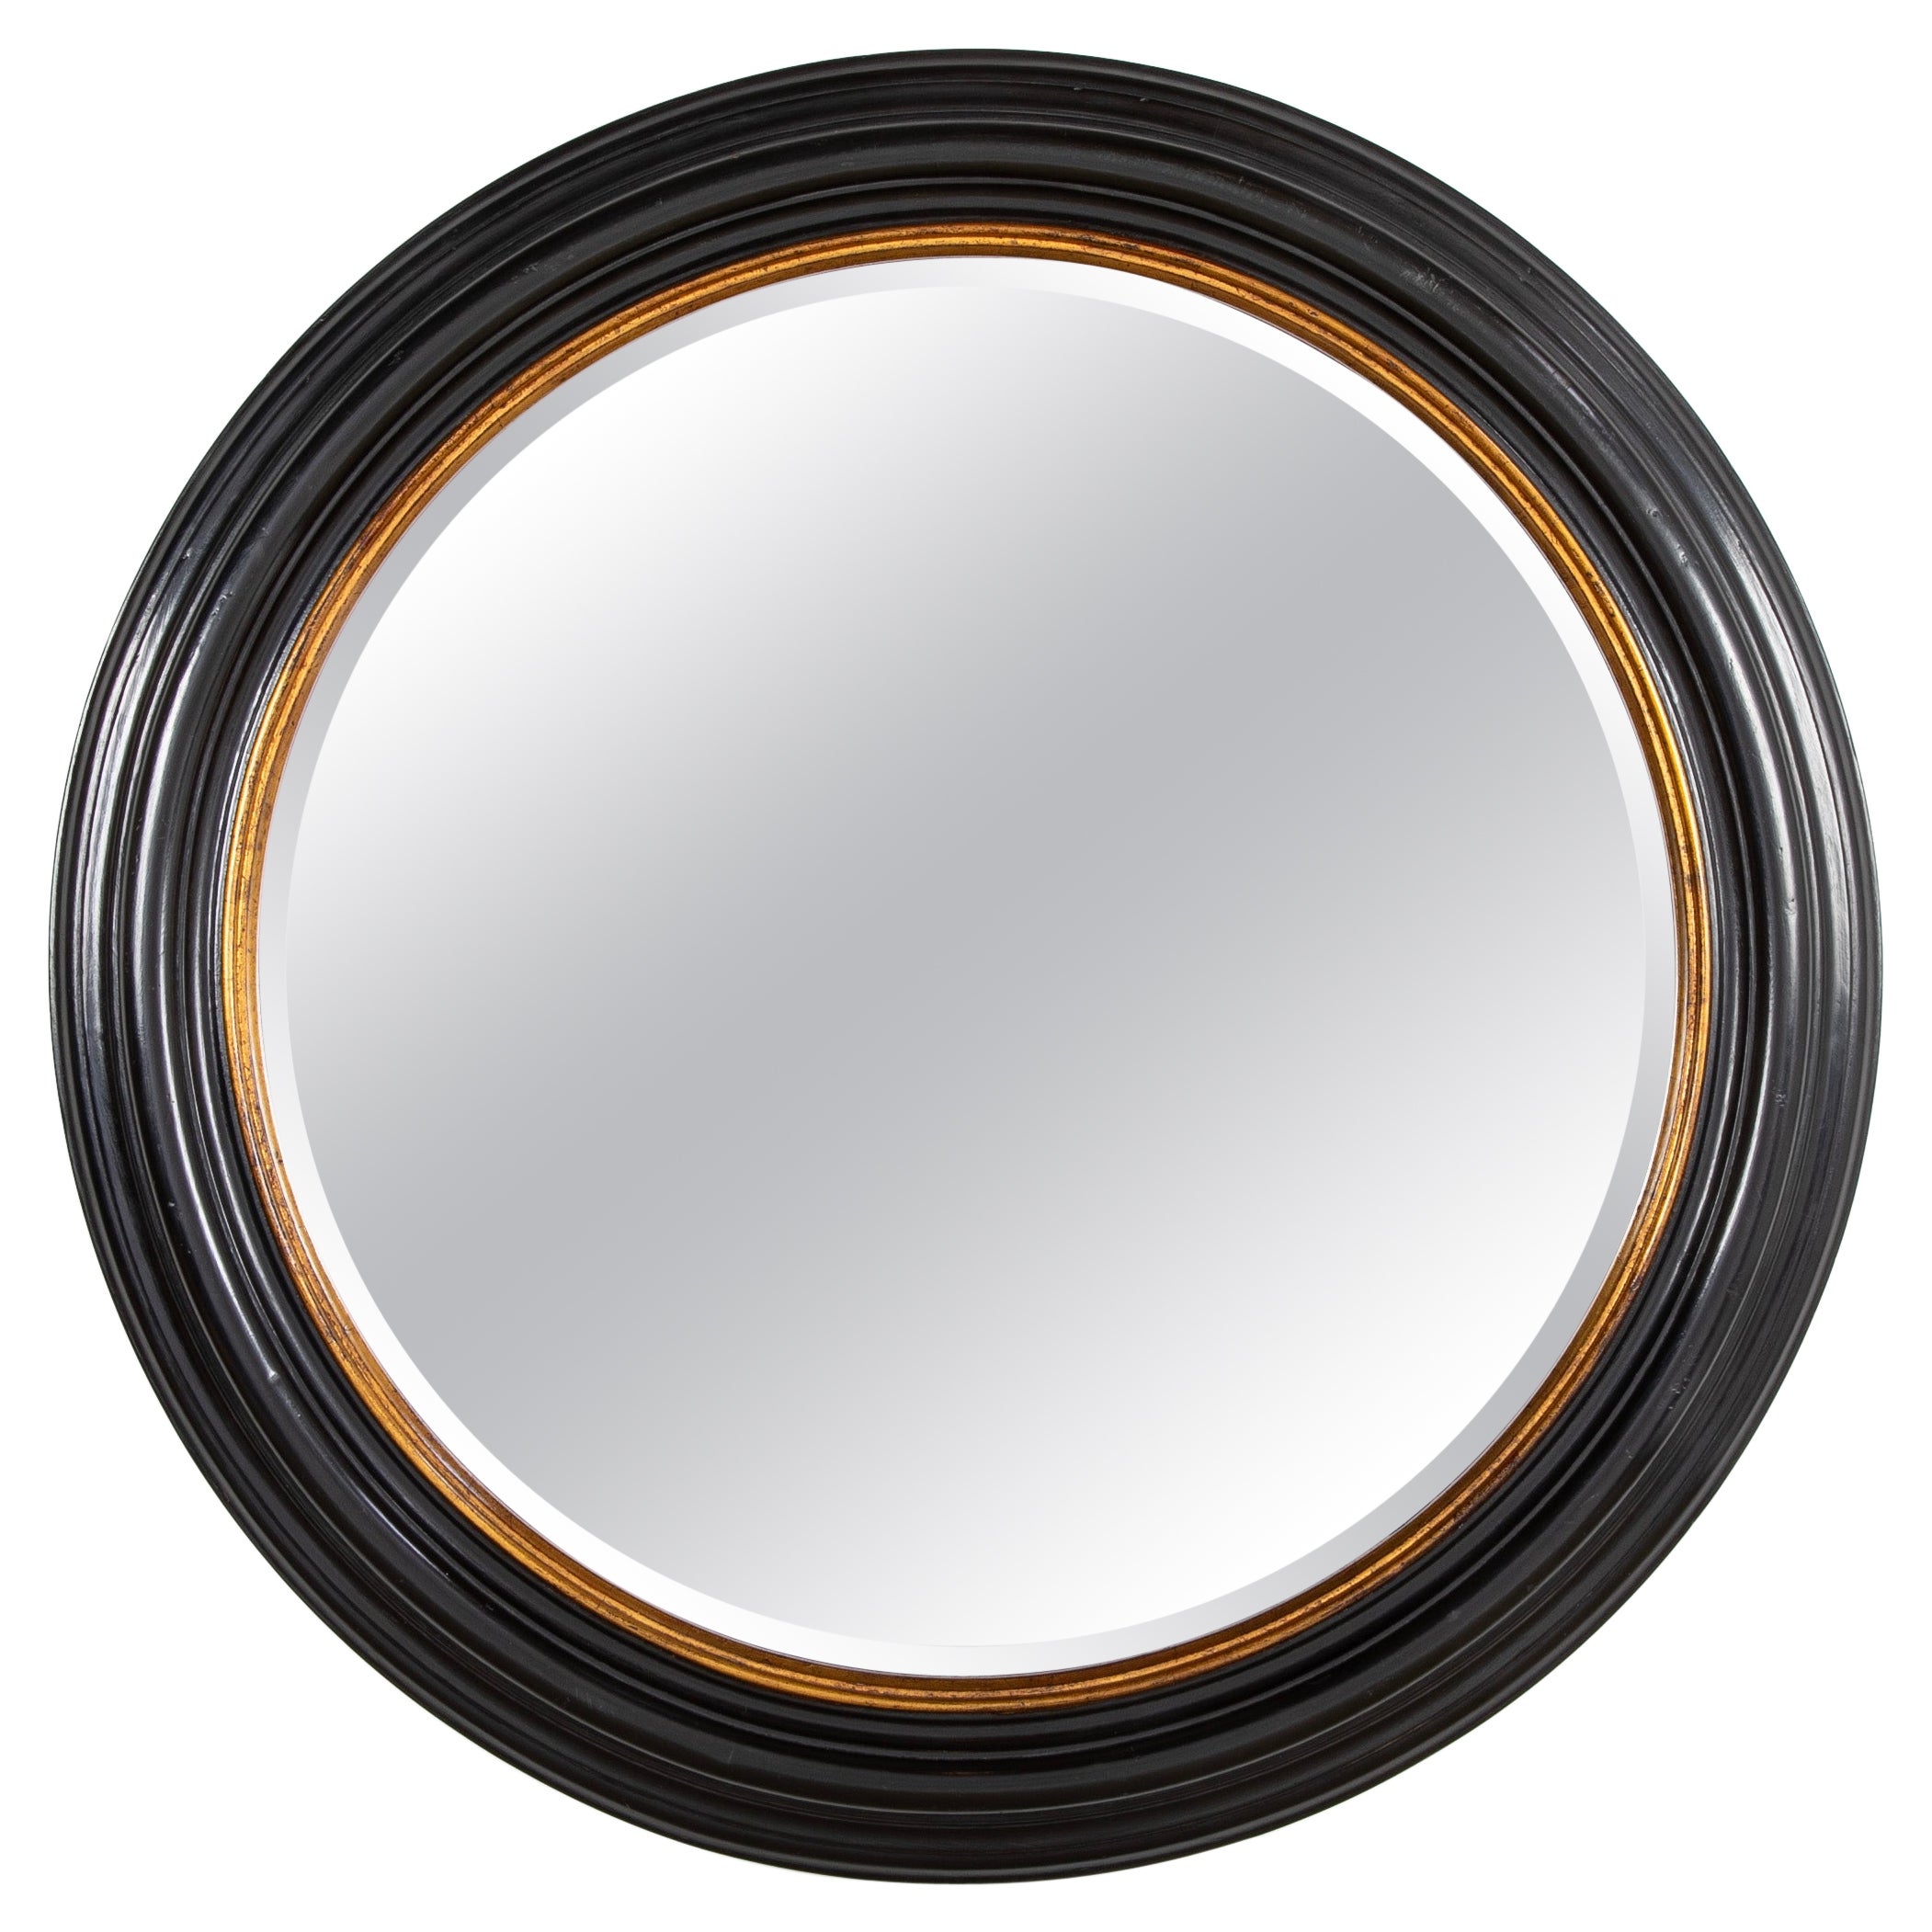 Regency Black Lacquer And Gilt Round Mirror With Beveled Glass, Large Scale